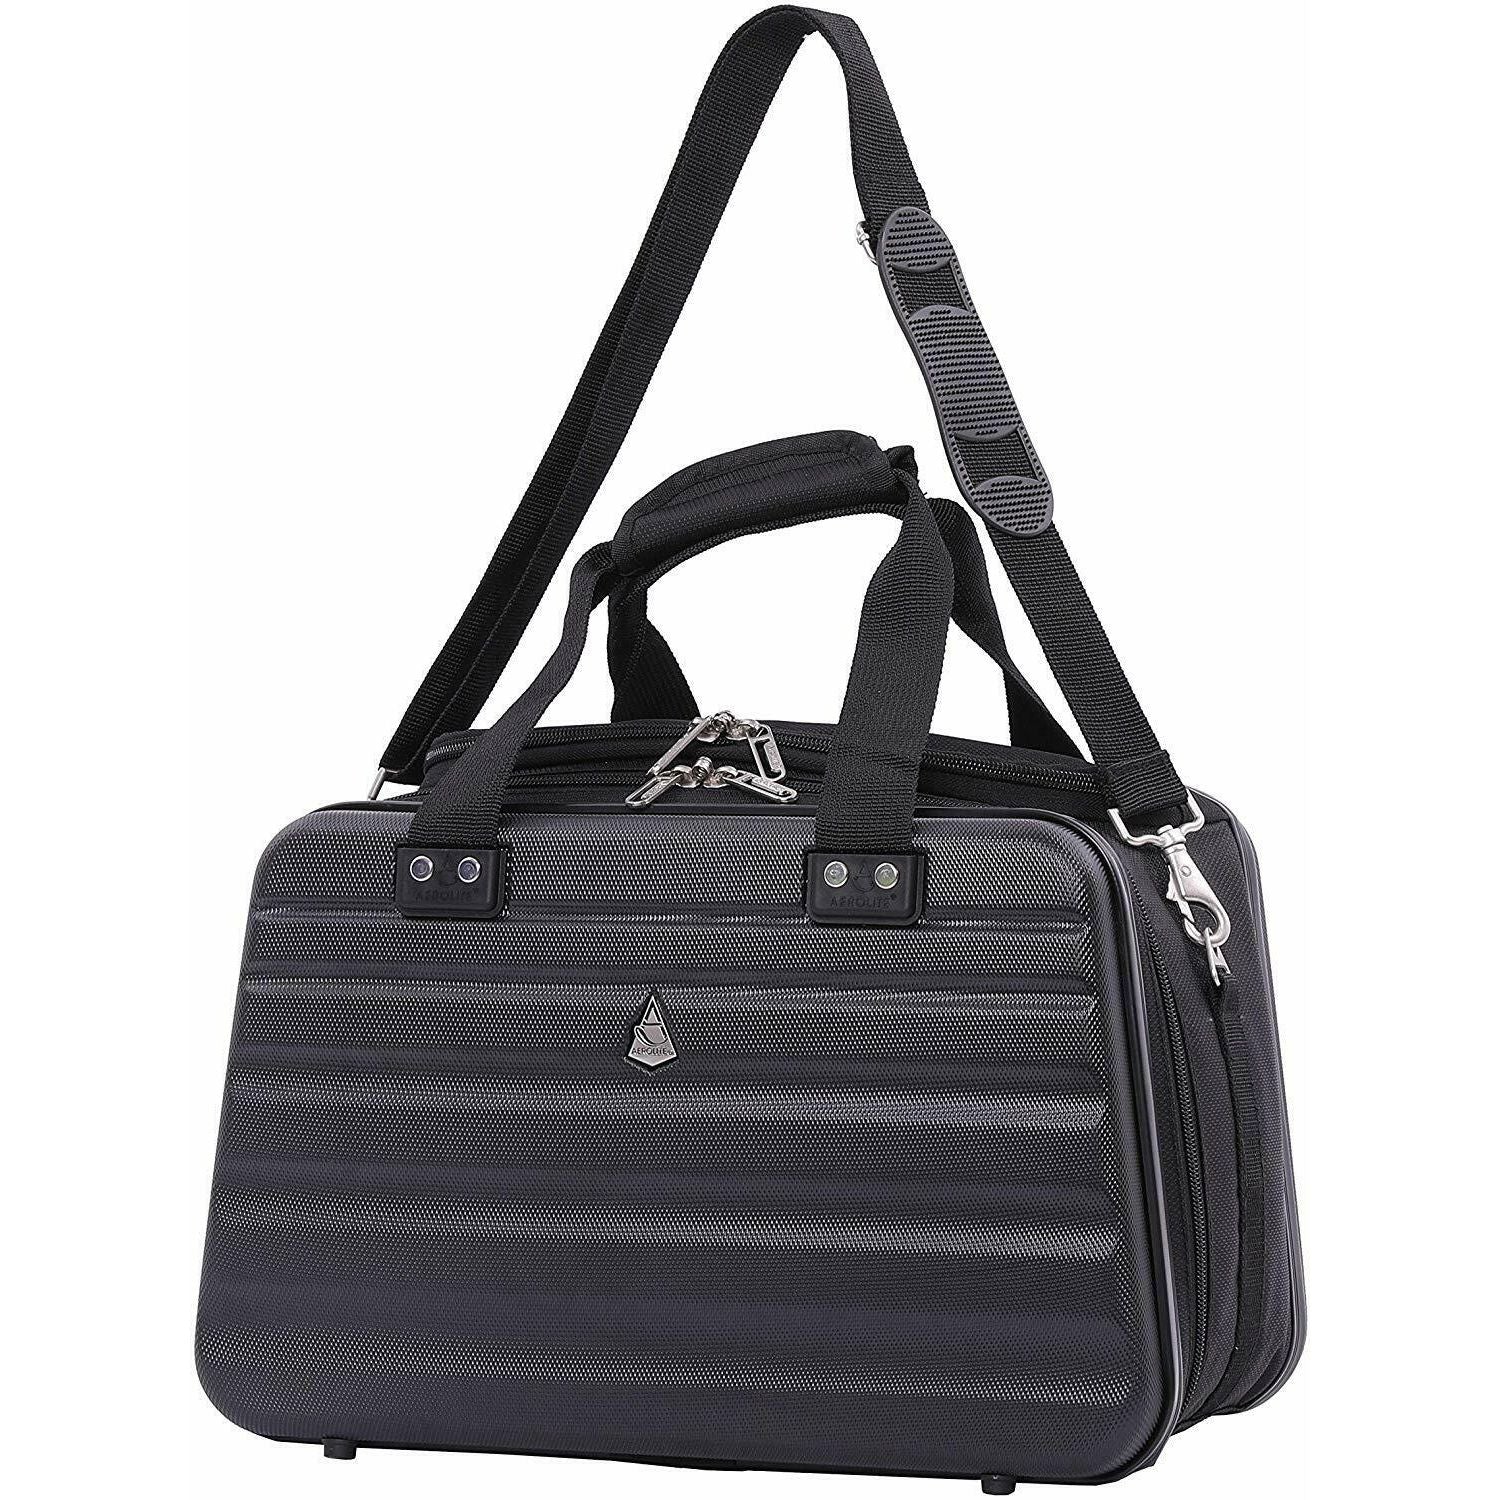 Aerolite (40x20x25cm) Hand Luggage Holdall Bag, Maximum Allowed Size For Ryanair, Approved For Ryanair, EasyJet, British Airways, Jet2, Wizz Air, Virgin Atlantic and Many More - Aerolite UK